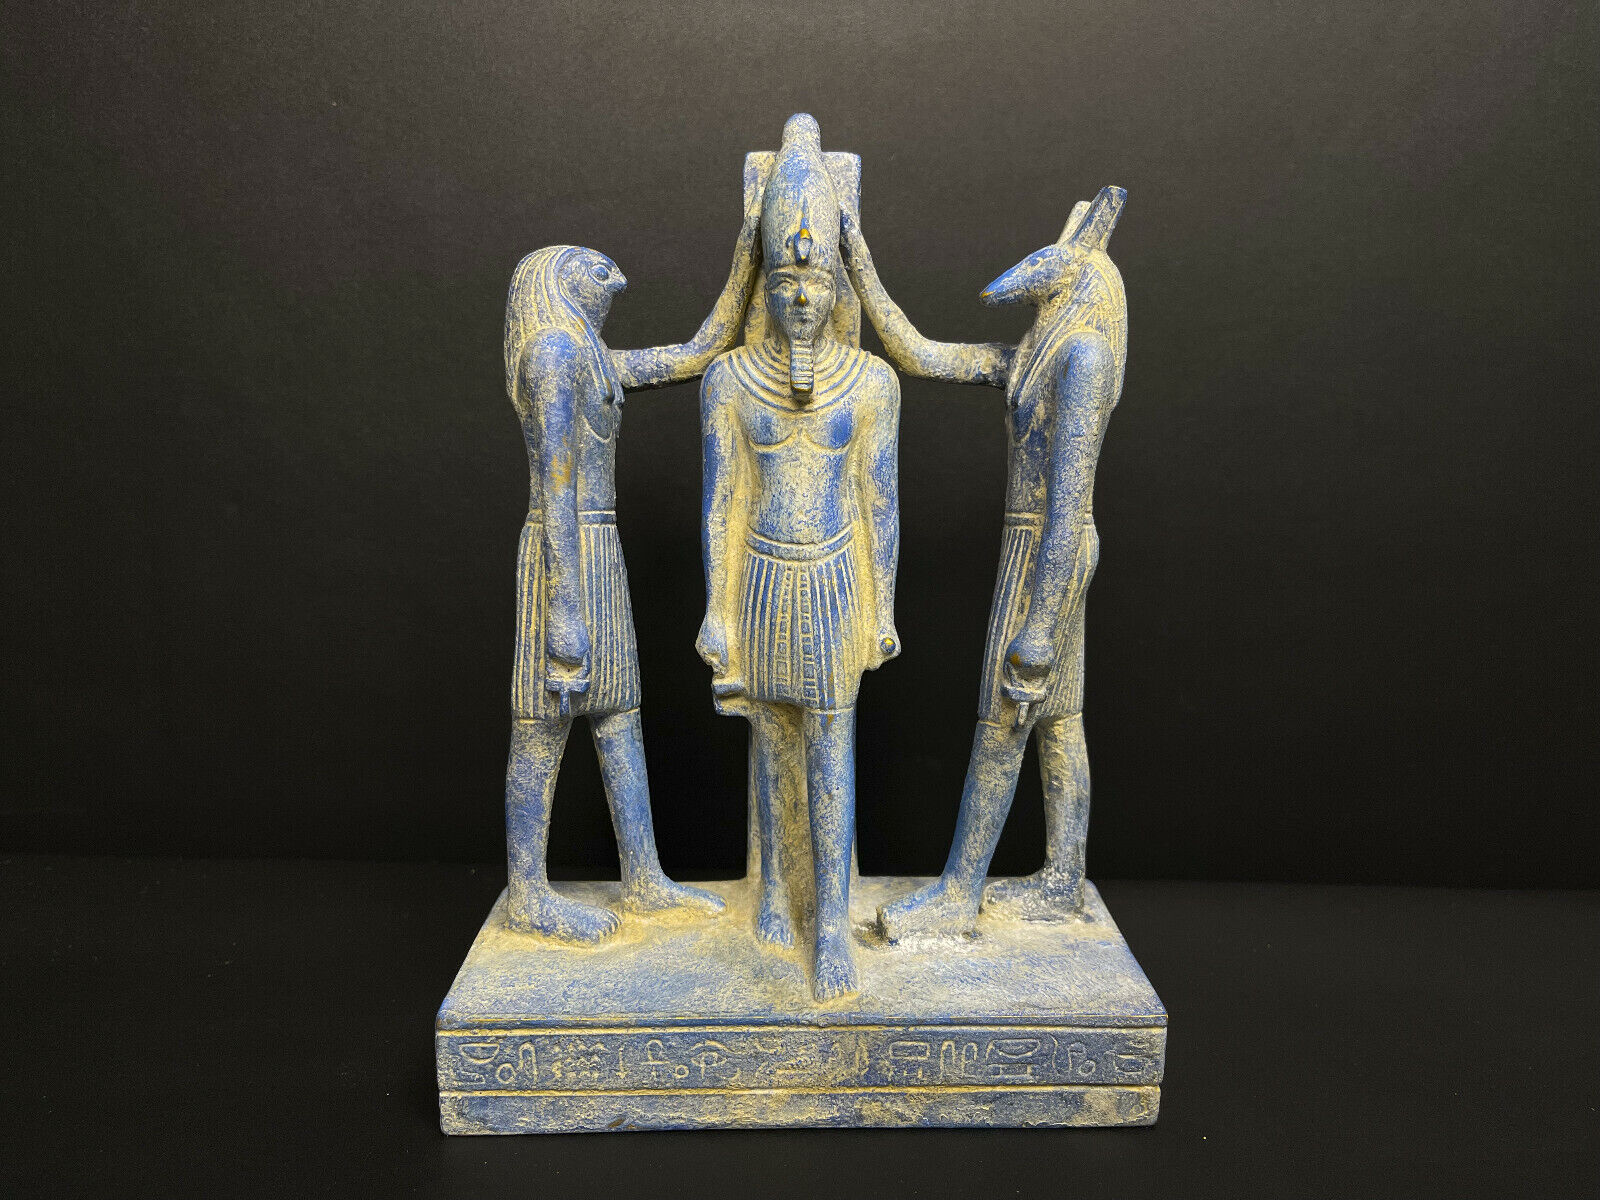 In A perfect scene King Ramesses the Third, the god Horus and the god Seth